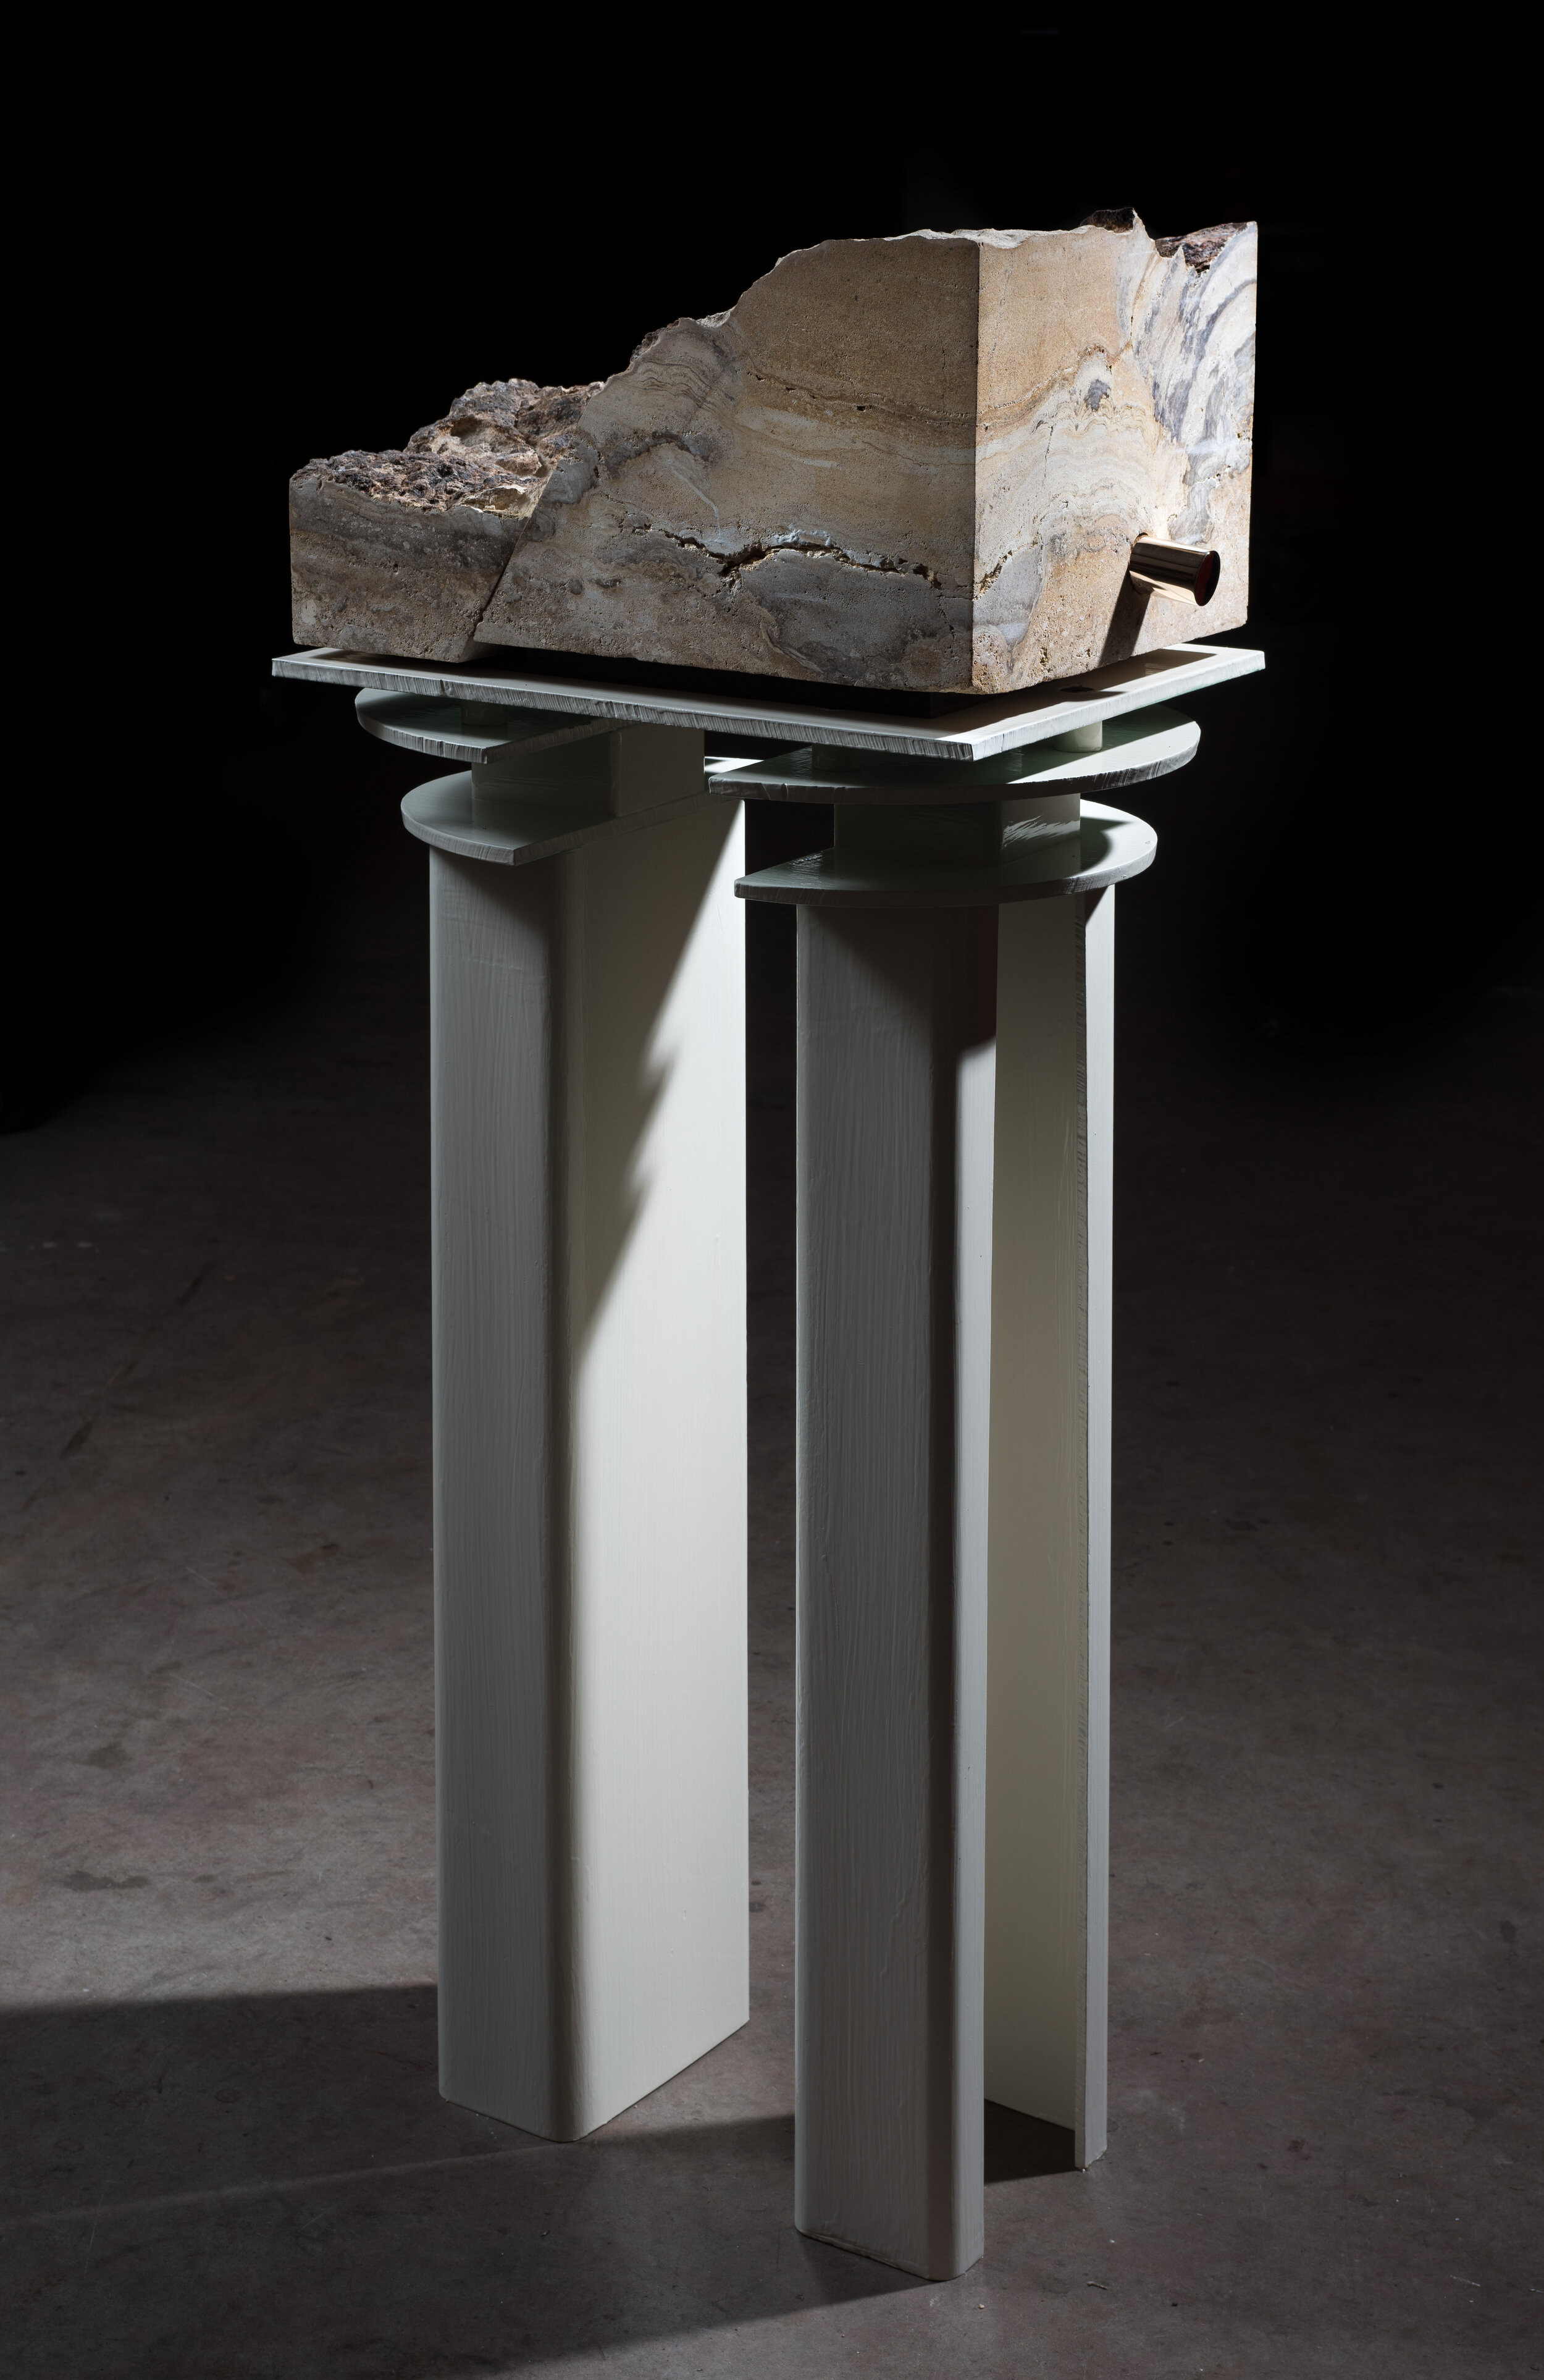  Kylie White  Model of an Earth Fastener on the Hierapolis Fault (Plutonion) , 2019 Steel, enamel, limestone, and bronze 43 x 20 x 13 inches Unique KYWH-0020 